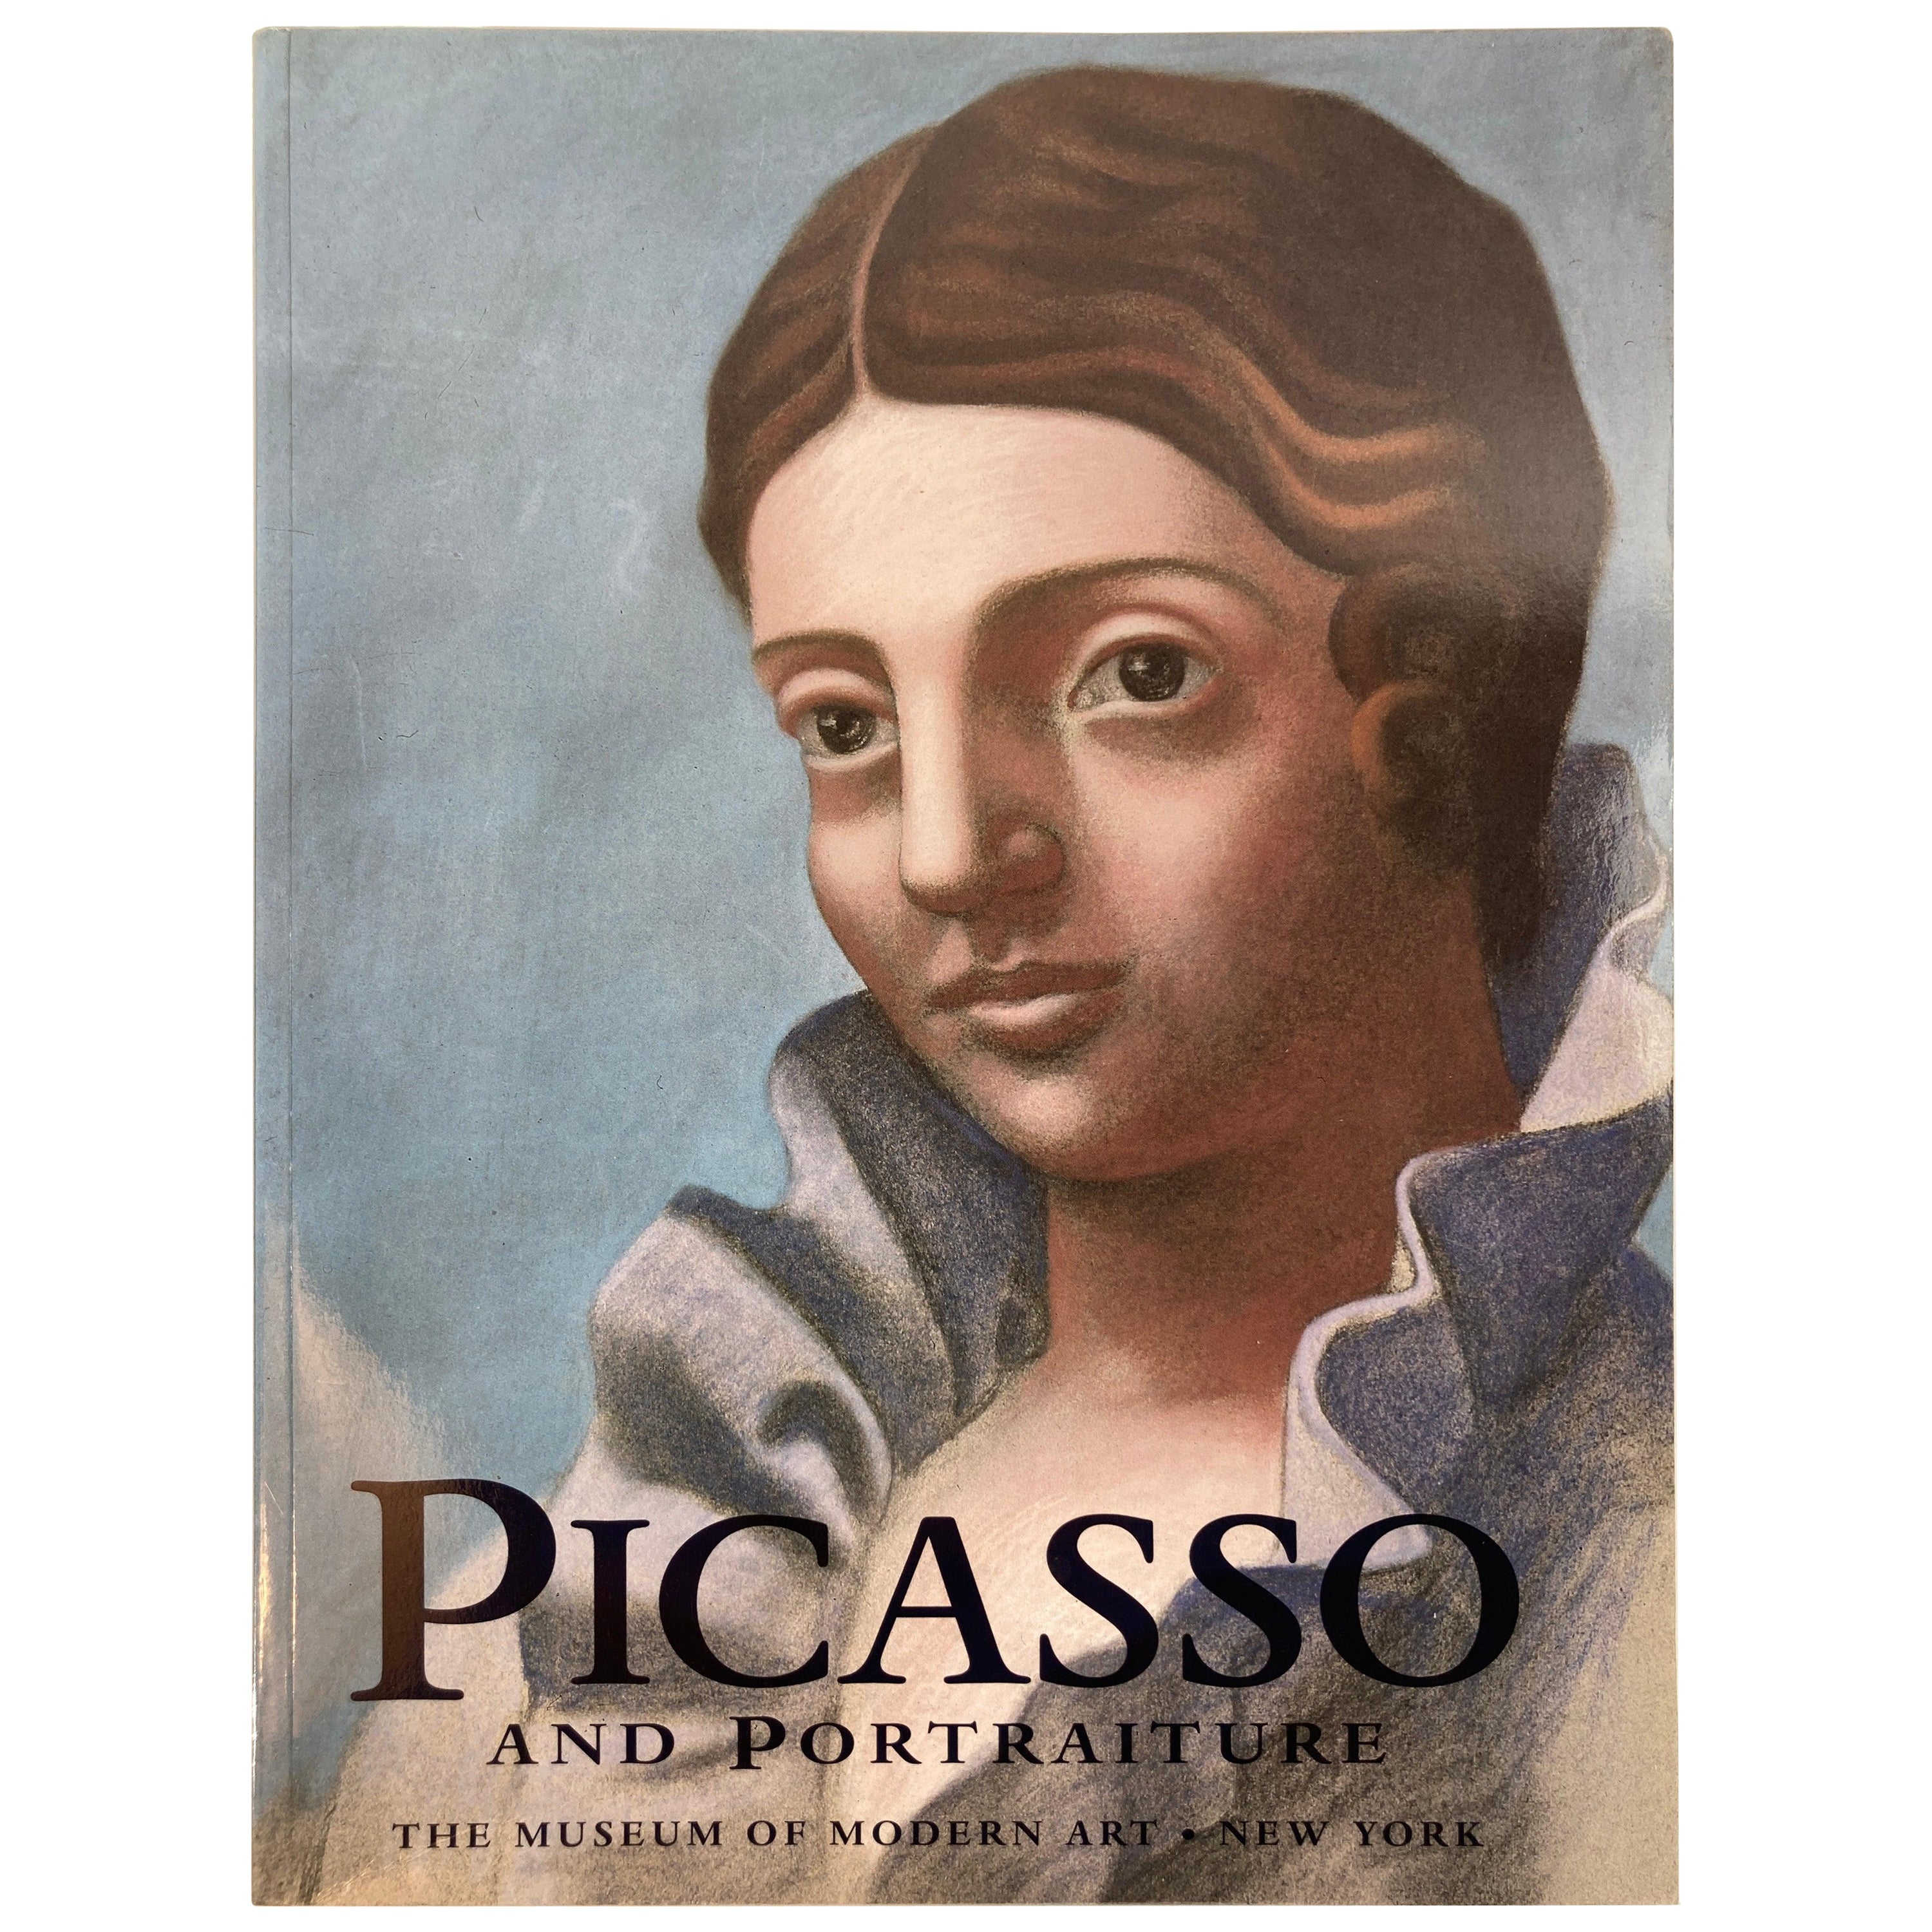 Picasso and Portraiture by William Rubin Book For Sale